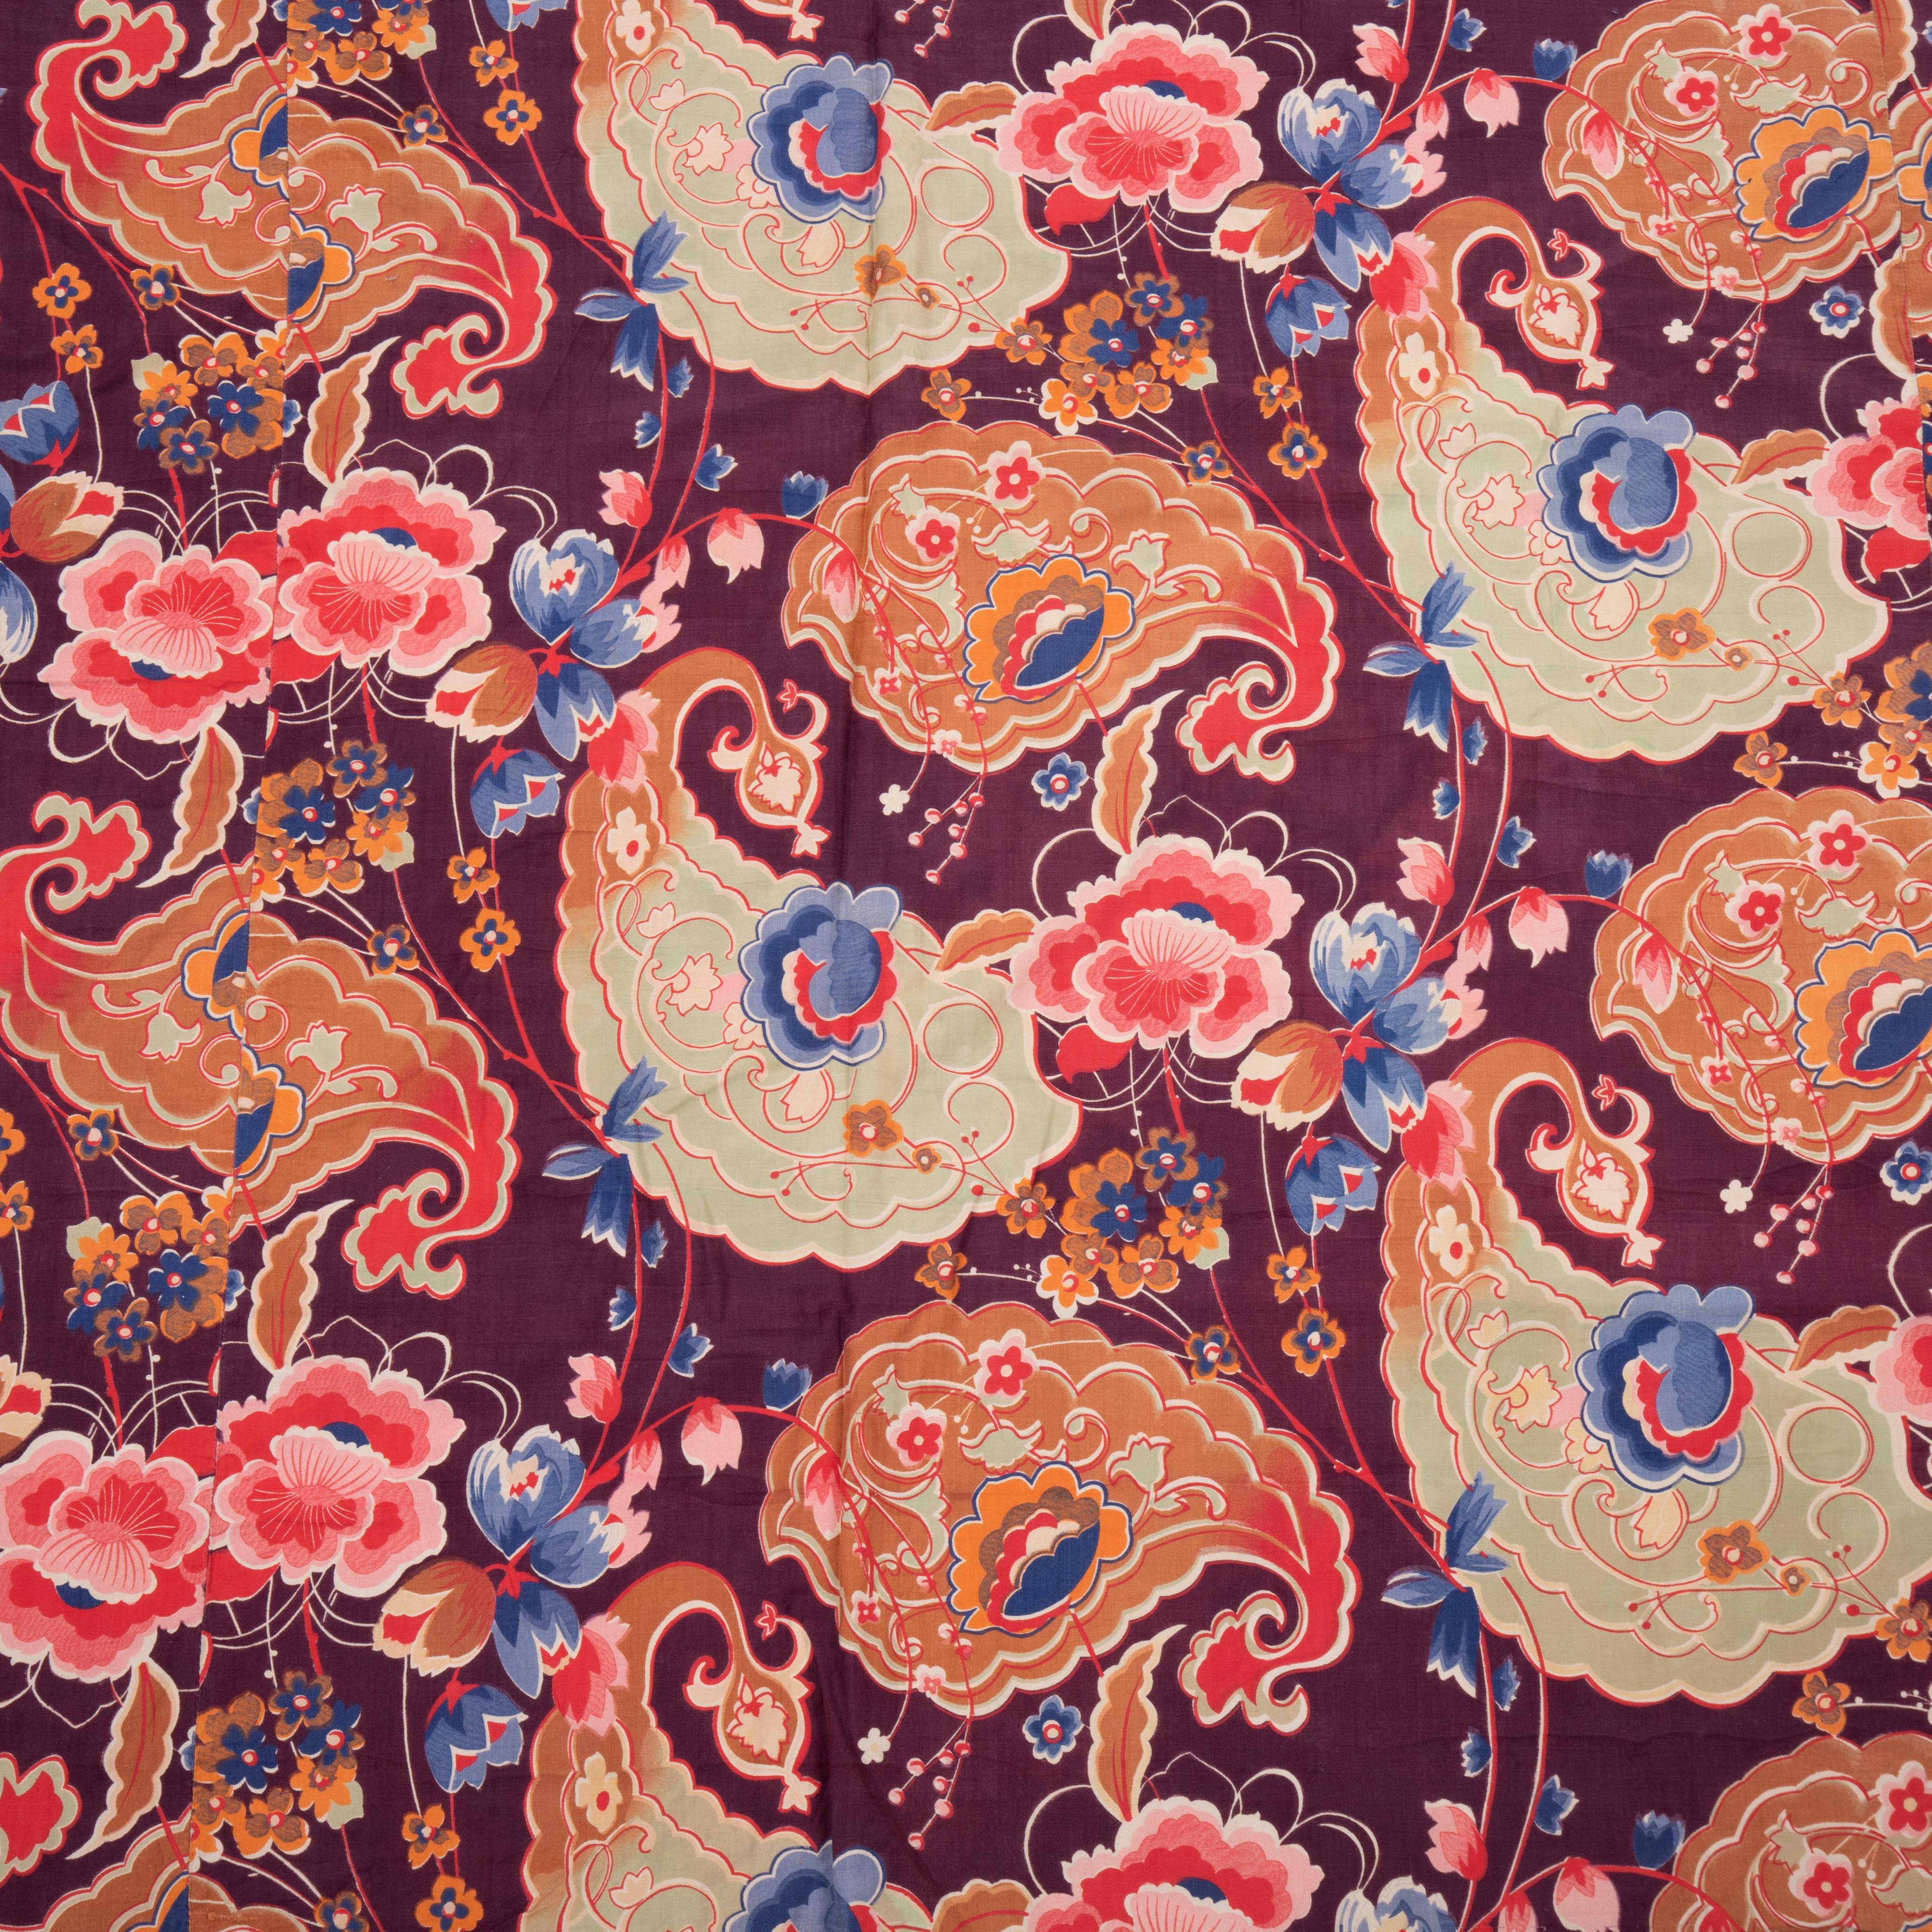 Kalamkari Roller Printed Cotton Panel, Made for Central Asian Markets  Mid 20th C.  Russia For Sale